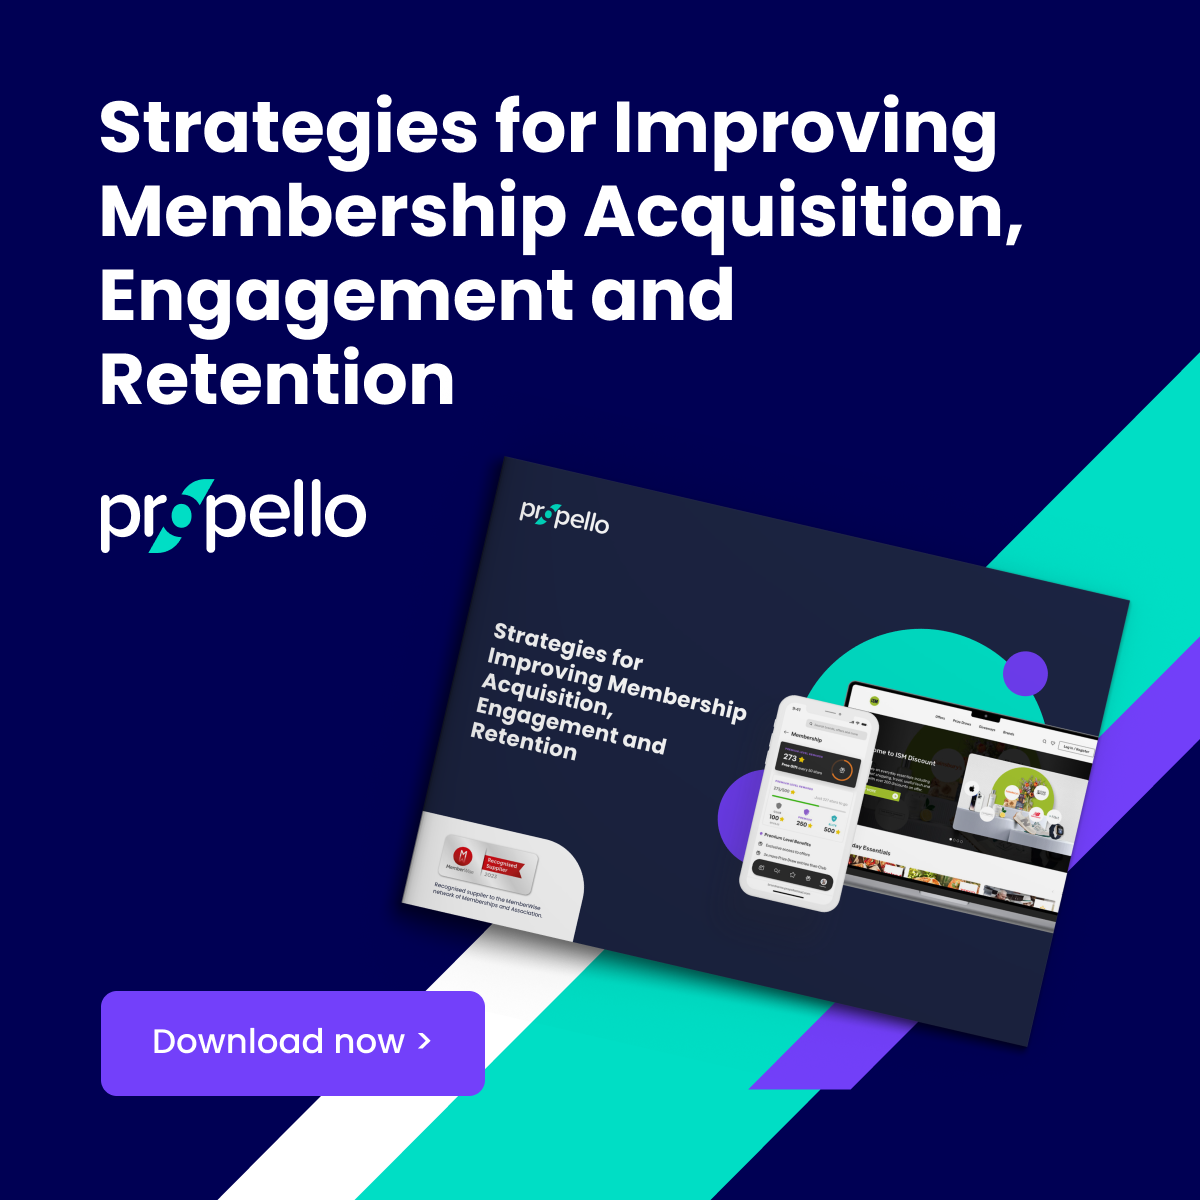 Strategies for Improving Membership Acquisition, Engagement and Retention